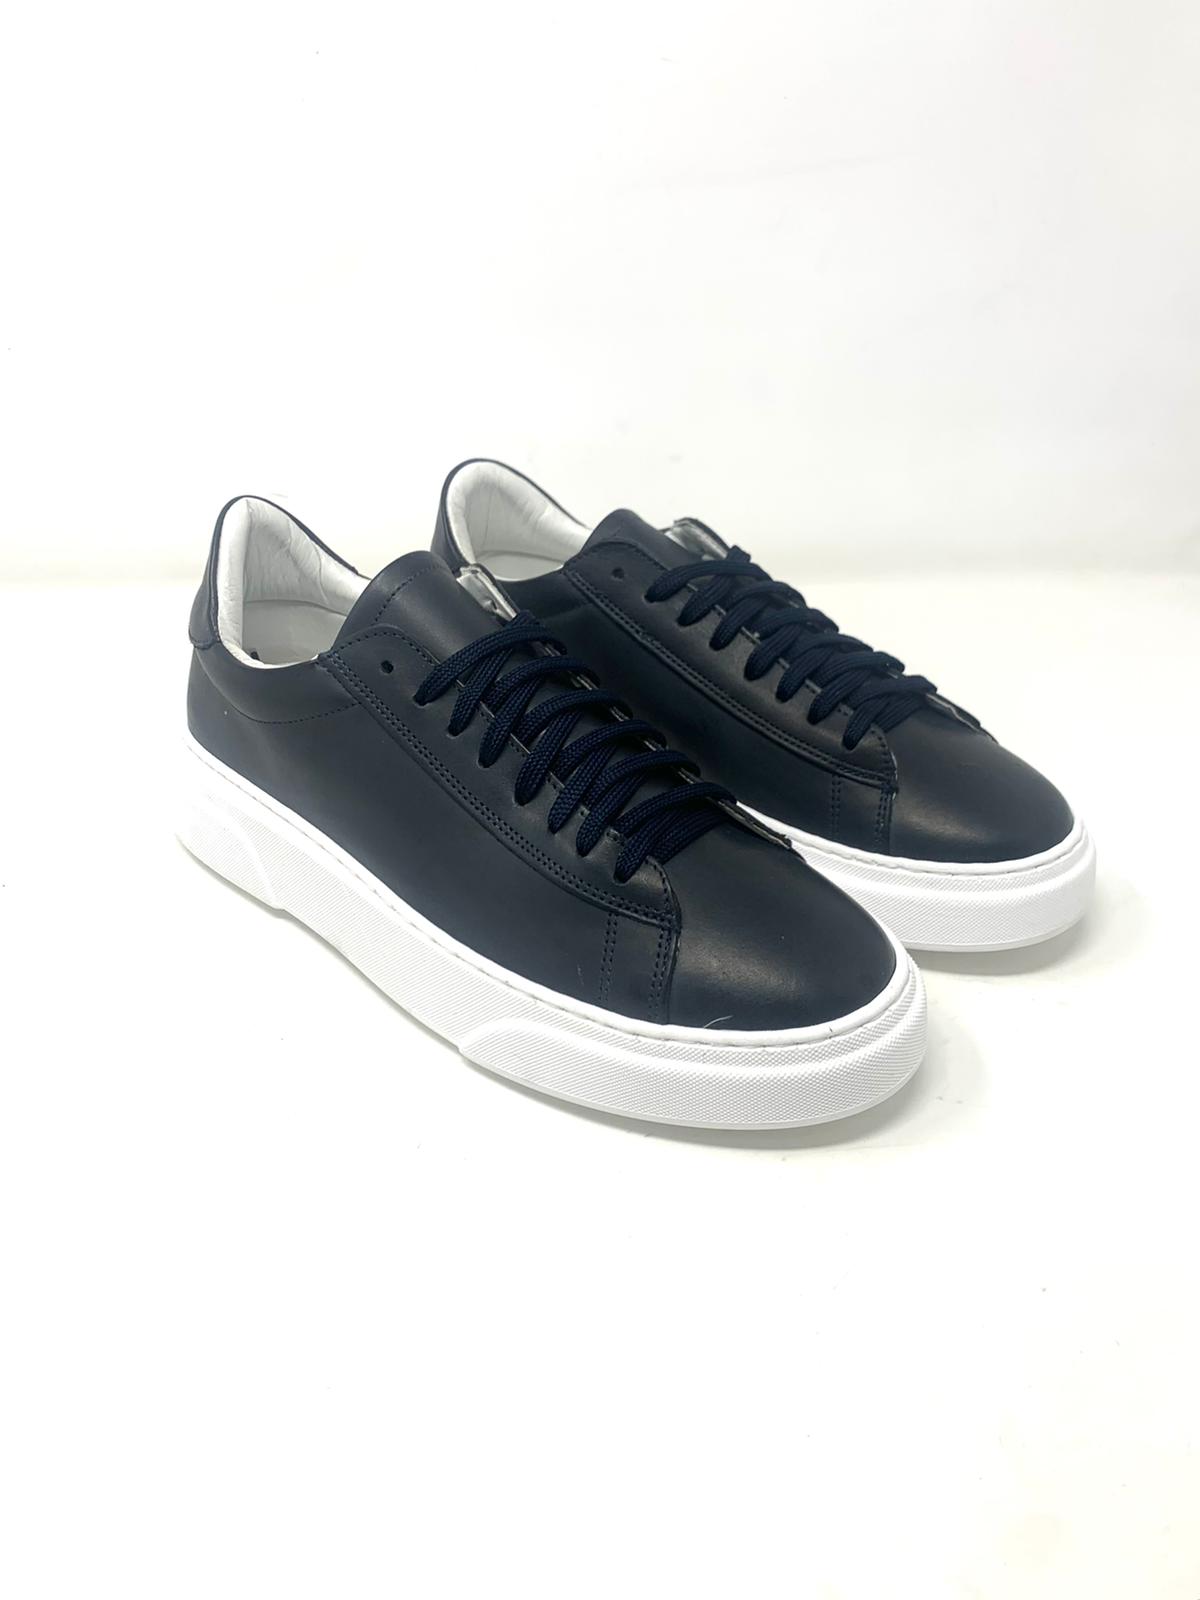 Sneakers basic vera pelle made in Italy